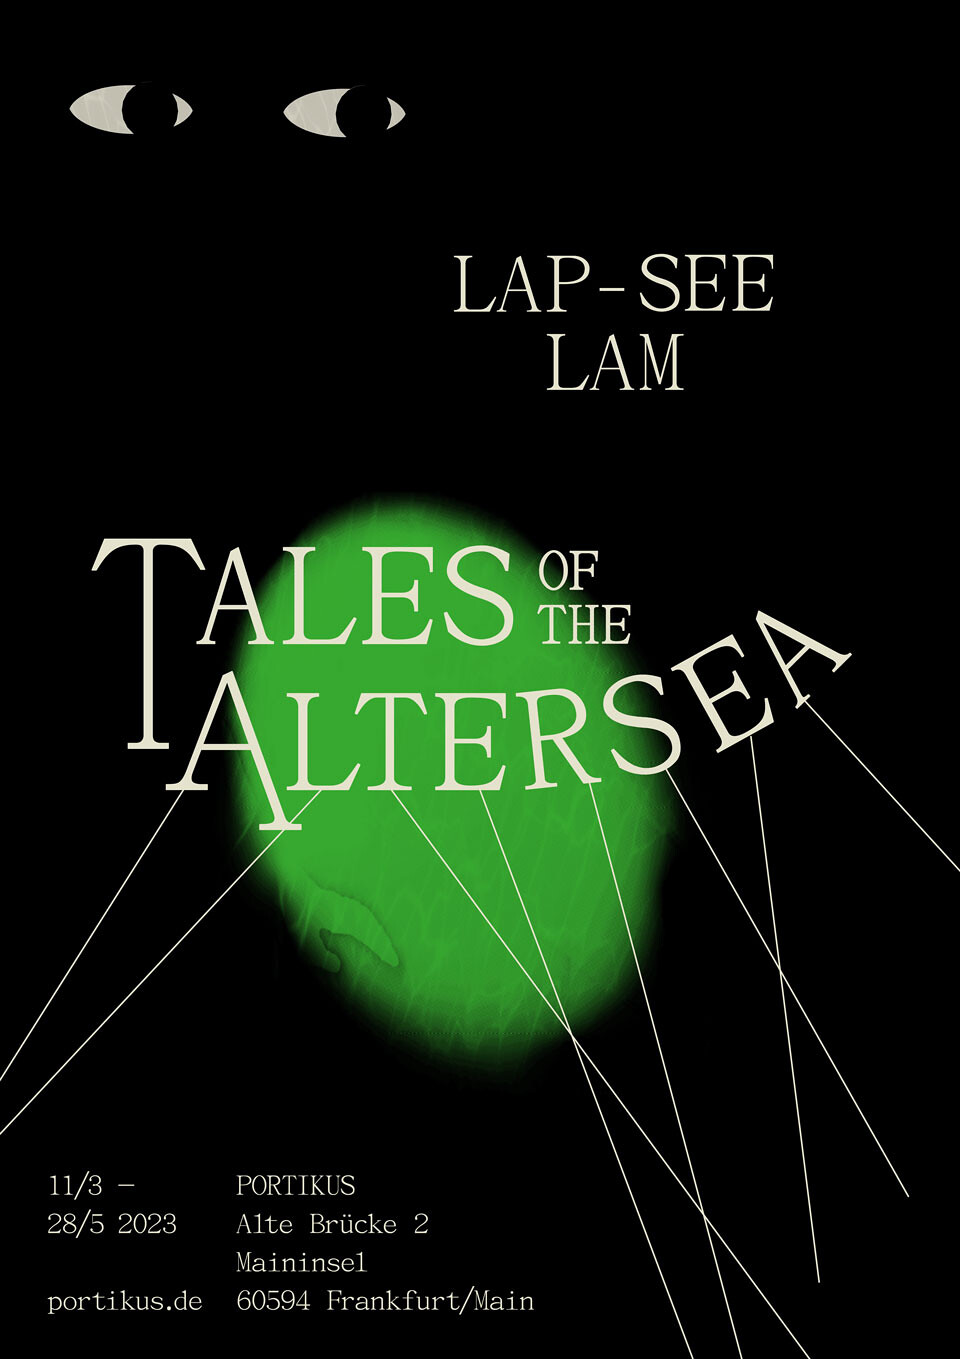 Lap-See Lam’s first institutional solo exhibition in Germany “Tales of the Altersea” opens at Portikus, Frankfurt